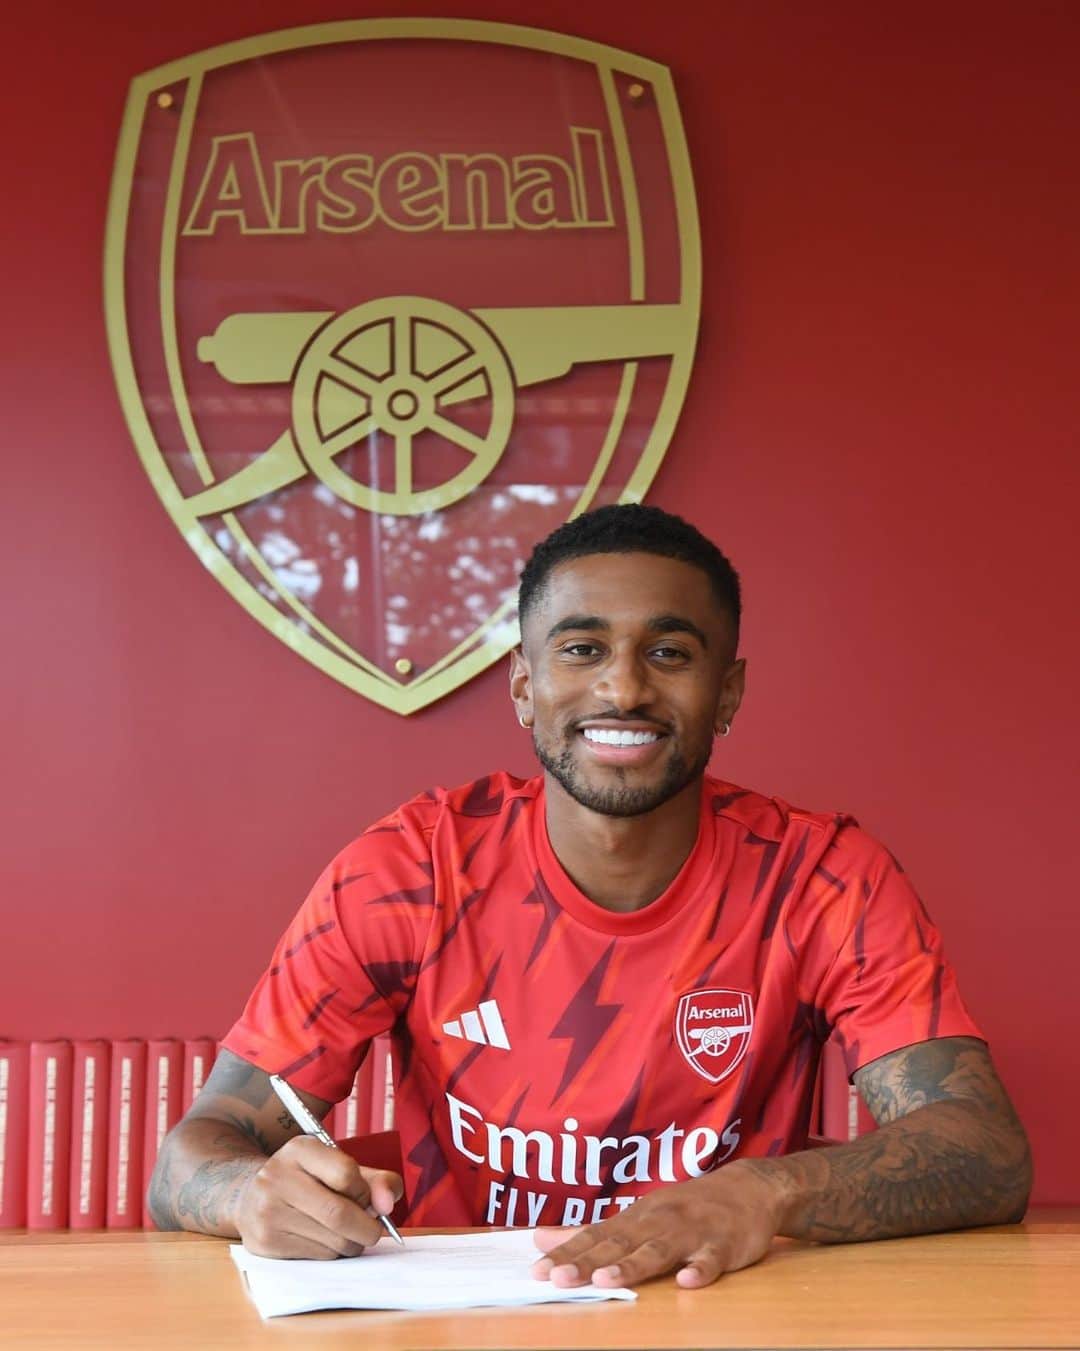 アーセナルFCさんのインスタグラム写真 - (アーセナルFCInstagram)「Reiss Nelson has signed a new long-term contract ✍️  The 23-year-old played a vital role last season, making 18 appearances in all competitions, scoring and assisting both three times, including his memorable late winner against Bournemouth in March.   Since joining us at the age of just eight-years-old, Reiss has progressed through our Academy, playing a key part at all age categories throughout his development.  Reiss’ senior debut was another memorable moment, as he picked up silverware coming on as a substitute in our 2017 FA Community Shield victory over Chelsea at Wembley Stadium. The following season saw Reiss rewarded with a new long-term contract, in a season where he gained valuable experience in the Bundesliga with Hoffenheim. During his time in Germany, our Academy graduate made 29 appearances for Hoffenheim, scoring seven goals and assisting once.  To gain further valuable experience in his development, Reiss joined Eredivisie side, Feyenoord on a season-long loan for the 2021/22 campaign. Our forward played 32 matches for the Dutch side, which included reaching the final of the UEFA Europa Conference League, where his side narrowly lost 1-0 to AS Roma. Reiss scored four goals and assisted seven times in all competitions for the Dutch team.  Sporting Director Edu said: “Reiss is still only 23-years-old but has already made a significant contribution to Arsenal for many years. He has gained good experience on loan, has come back and showed just how valuable he is to us. We are so happy to agree a new deal with Reiss, and we are proud that he is another young player who has developed through our Academy into our first team.”  Mikel Arteta added: “Reiss is a player I have admired since the first day I was here. He has tremendous ability and is such an exciting offensive talent. Reiss knows how important he is to our squad with the quality he has. It’s great that Reiss has committed his future to us - he knows this club so well, he grew up here and we look forward to enjoying many more good moments with him.”  Reiss’ new contract is subject to the completion of regulatory processes.」7月6日 23時20分 - arsenal